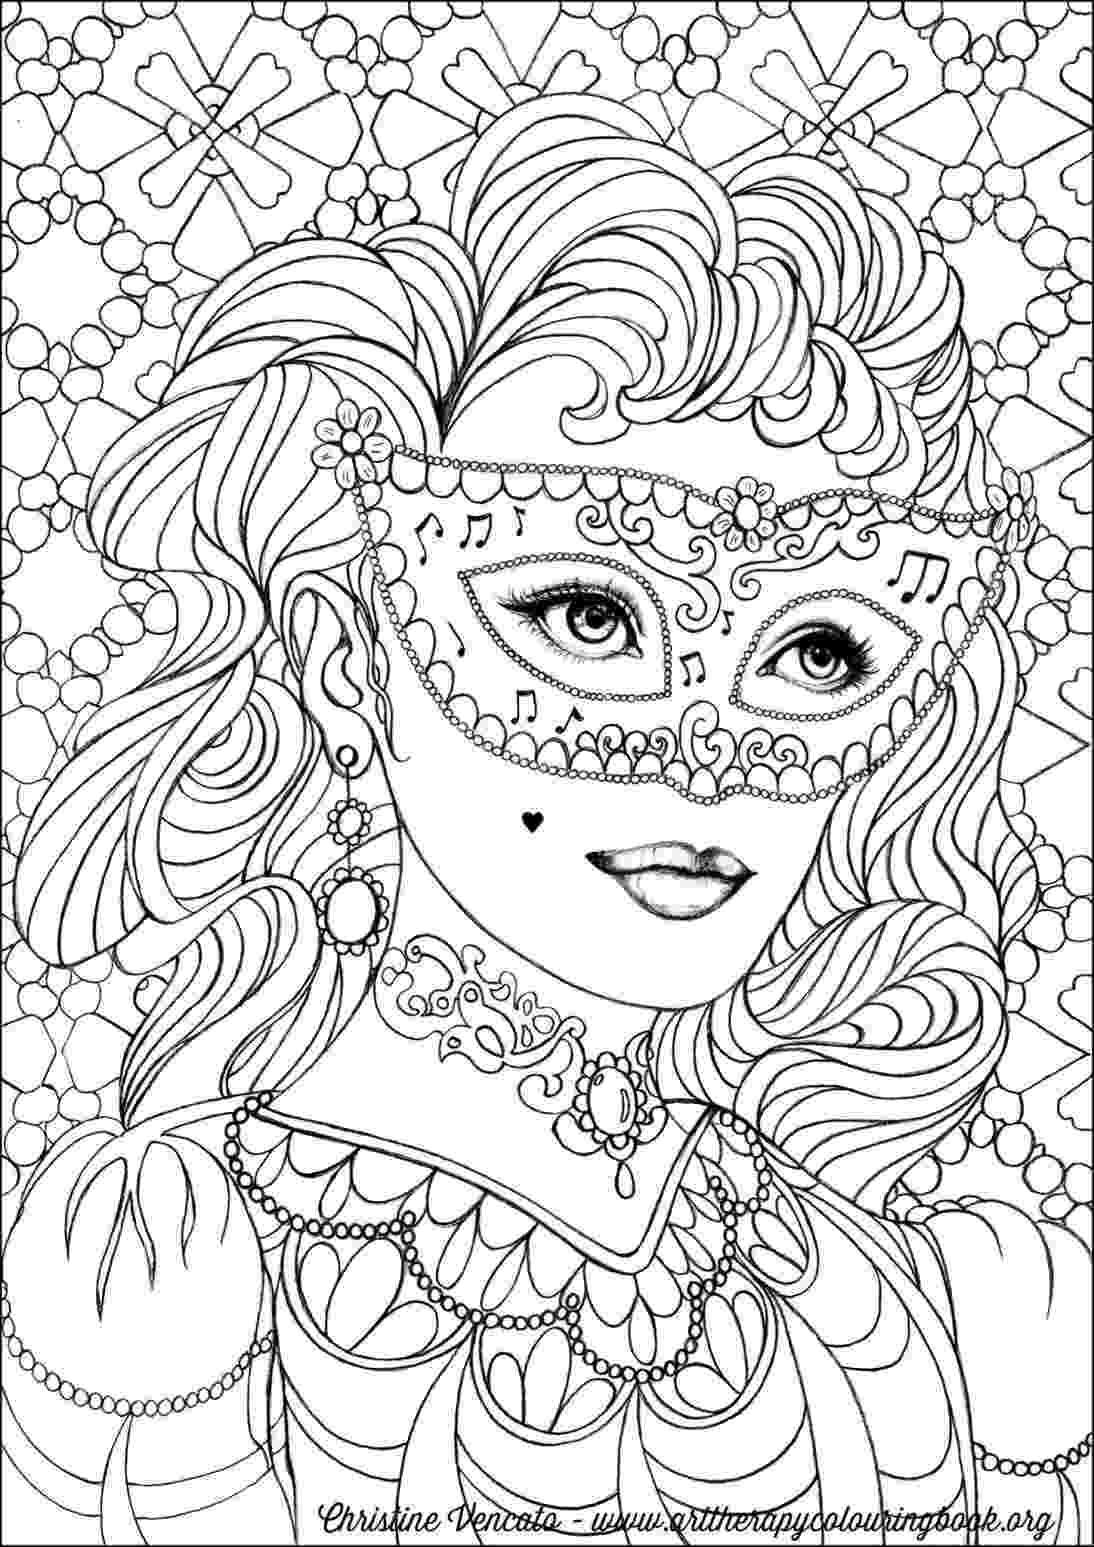 colouring pages adults online free 43 printable adult coloring pages pdf downloads colouring pages online adults free 